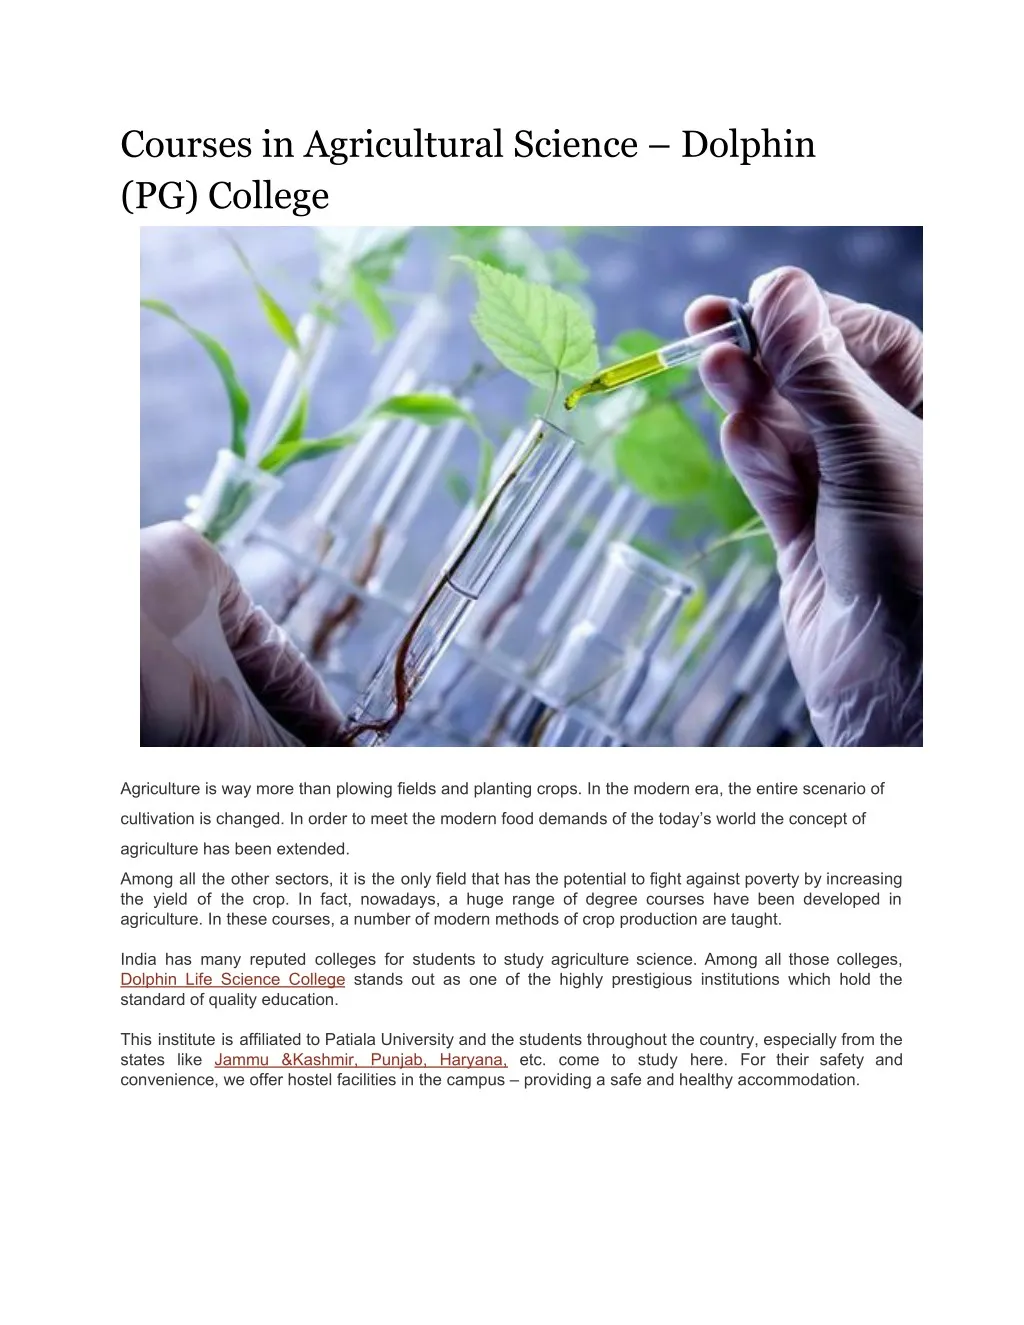 courses in agricultural science dolphin pg college